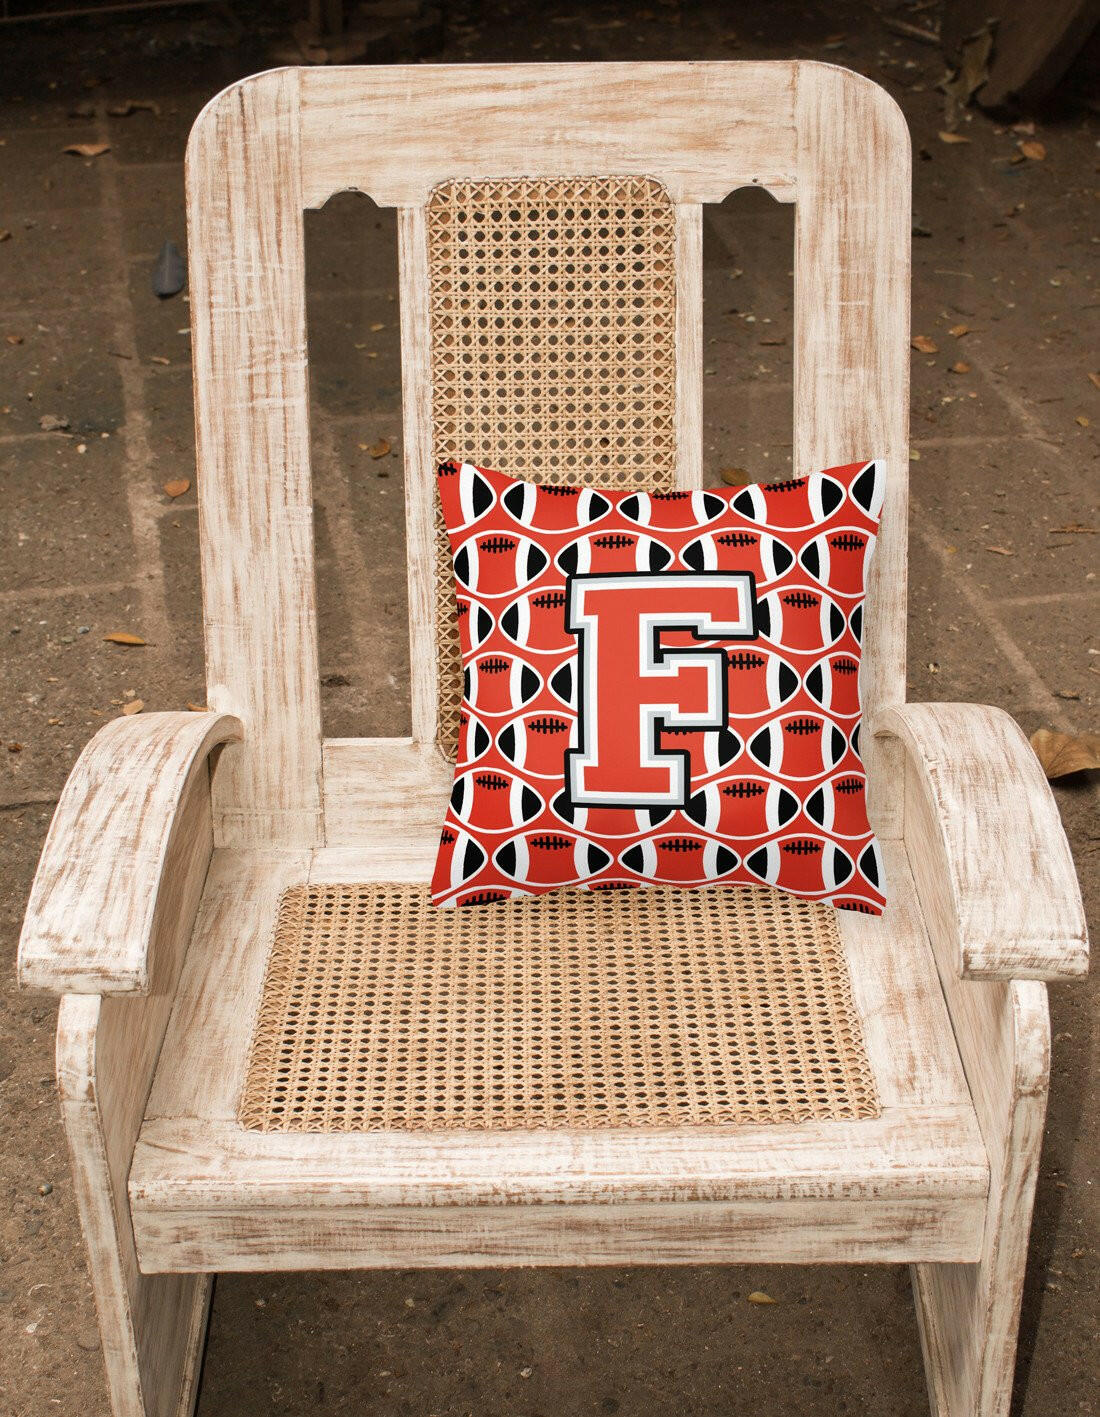 Letter F Football Scarlet and Grey Fabric Decorative Pillow CJ1067-FPW1414 by Caroline's Treasures